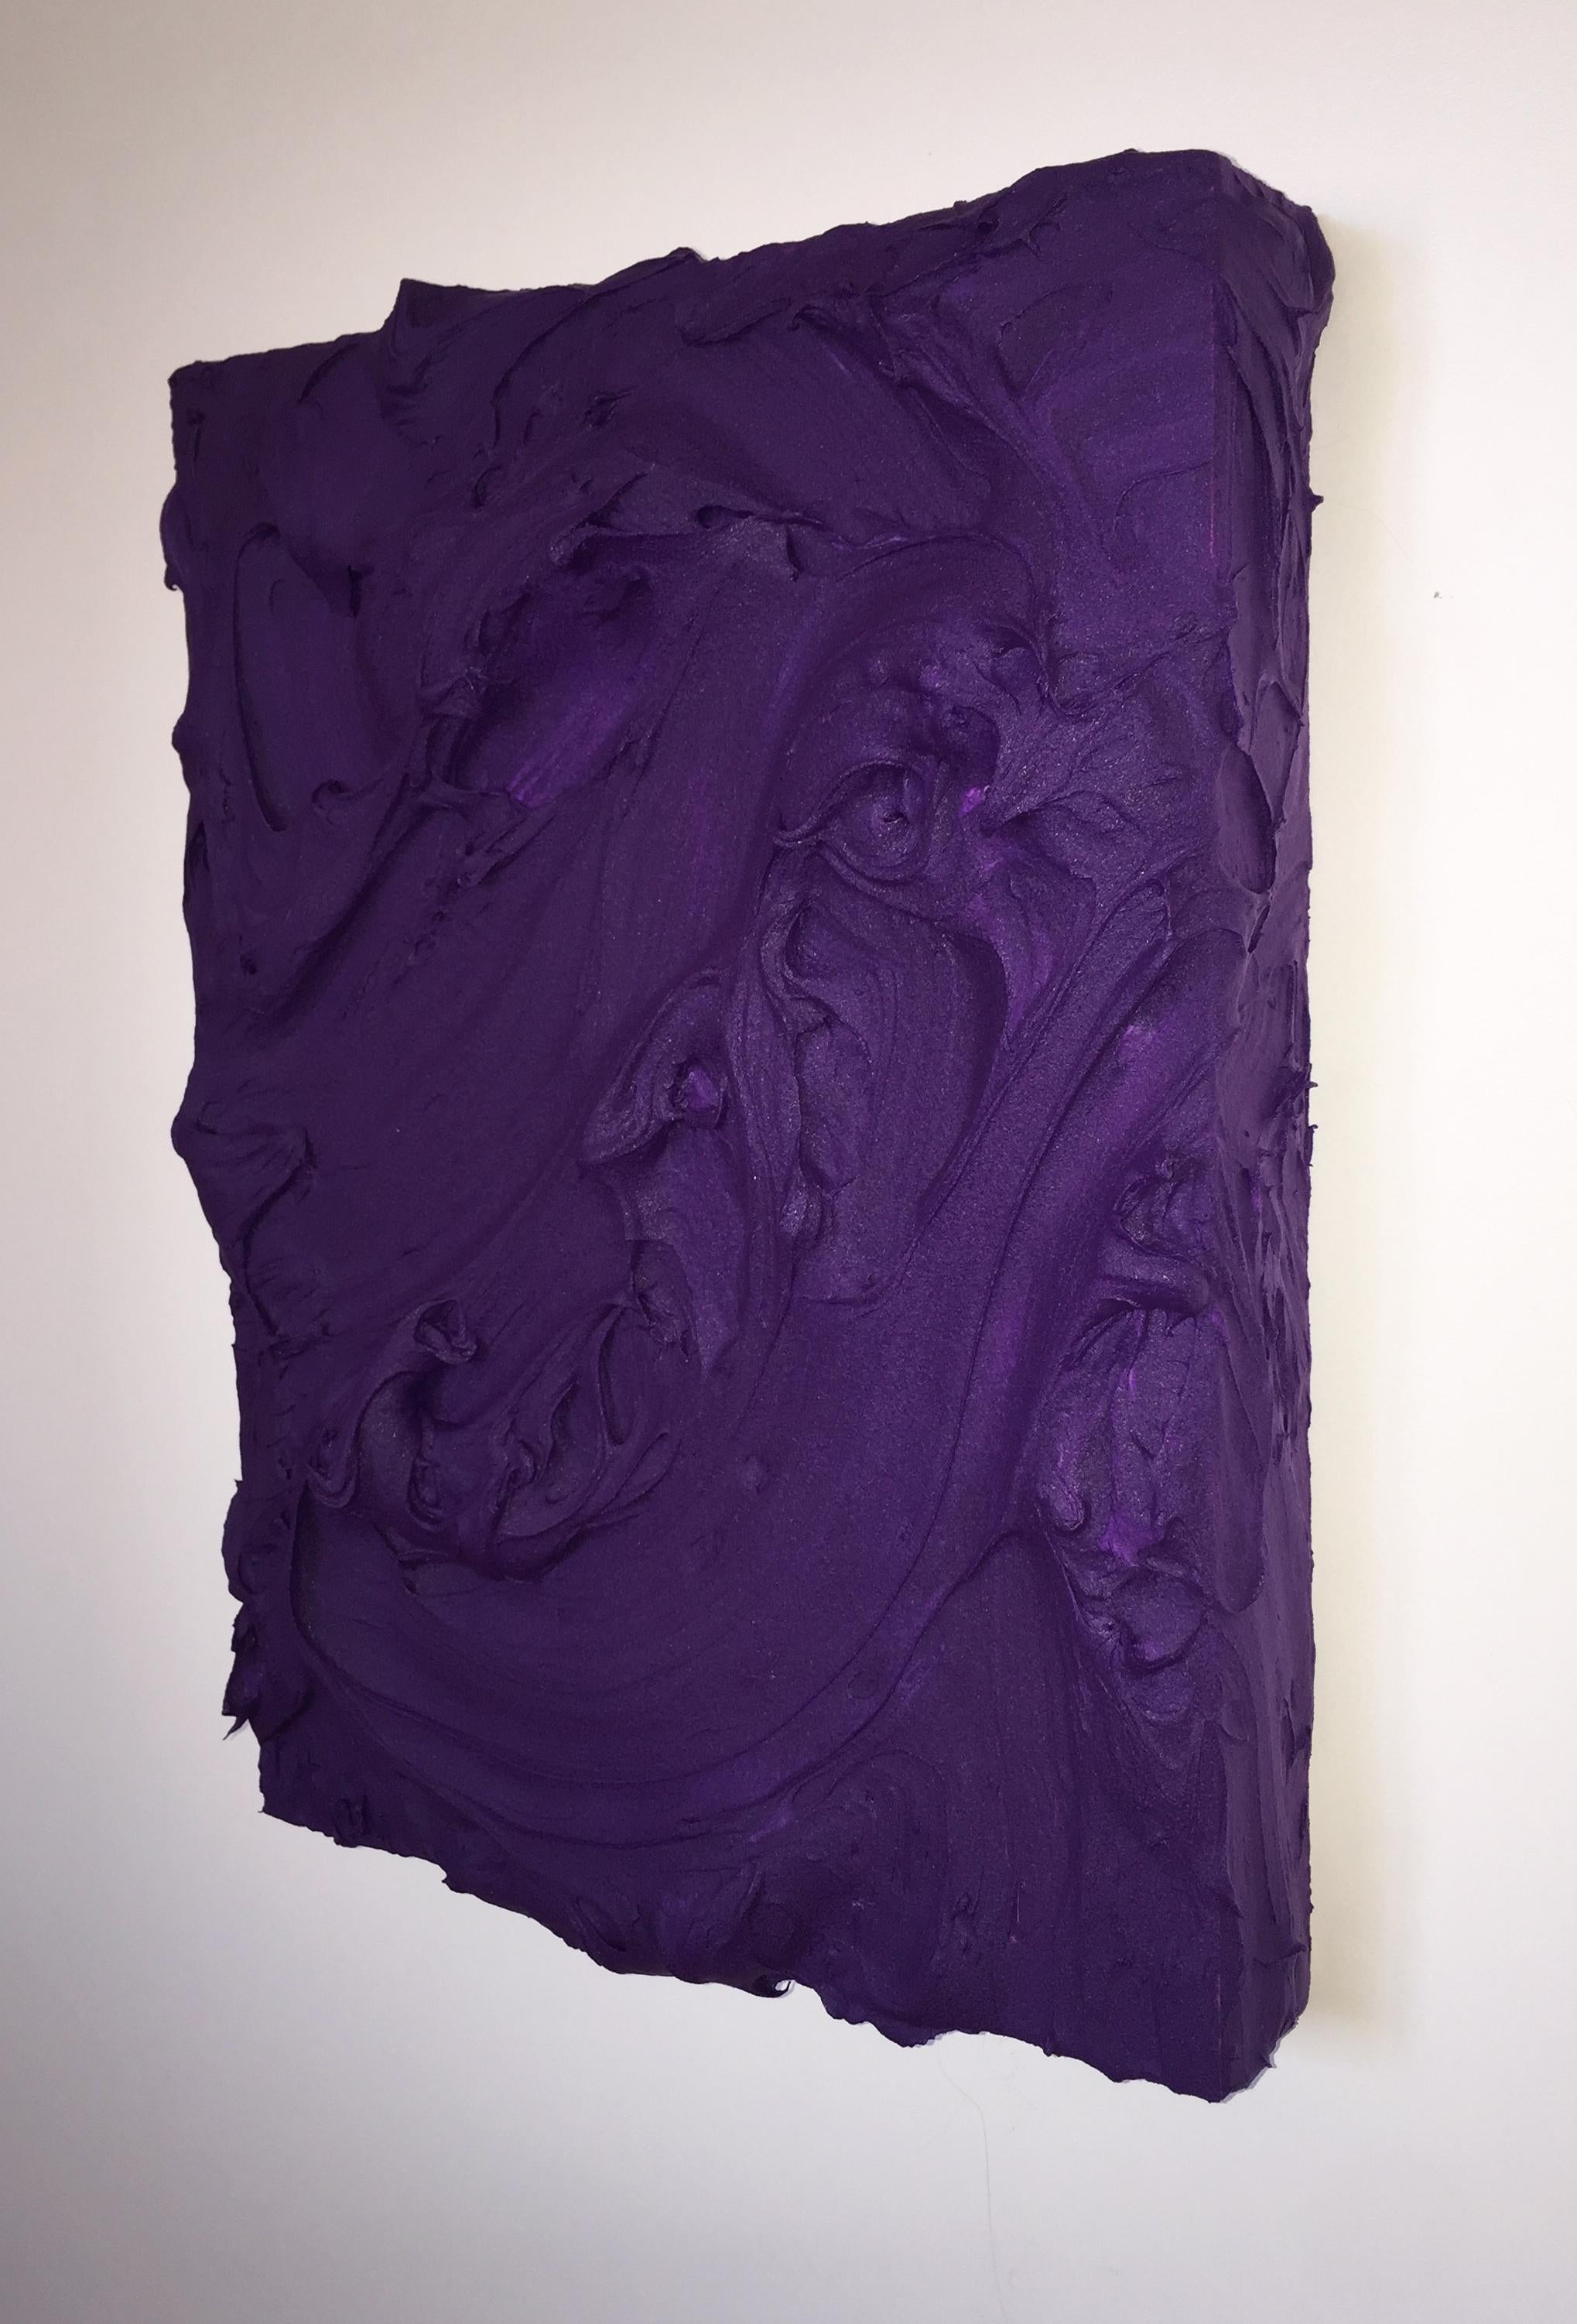 Grape Excess (violet impasto thick painting dark contemporary design vivid)  - Contemporary Painting by Chloe Hedden